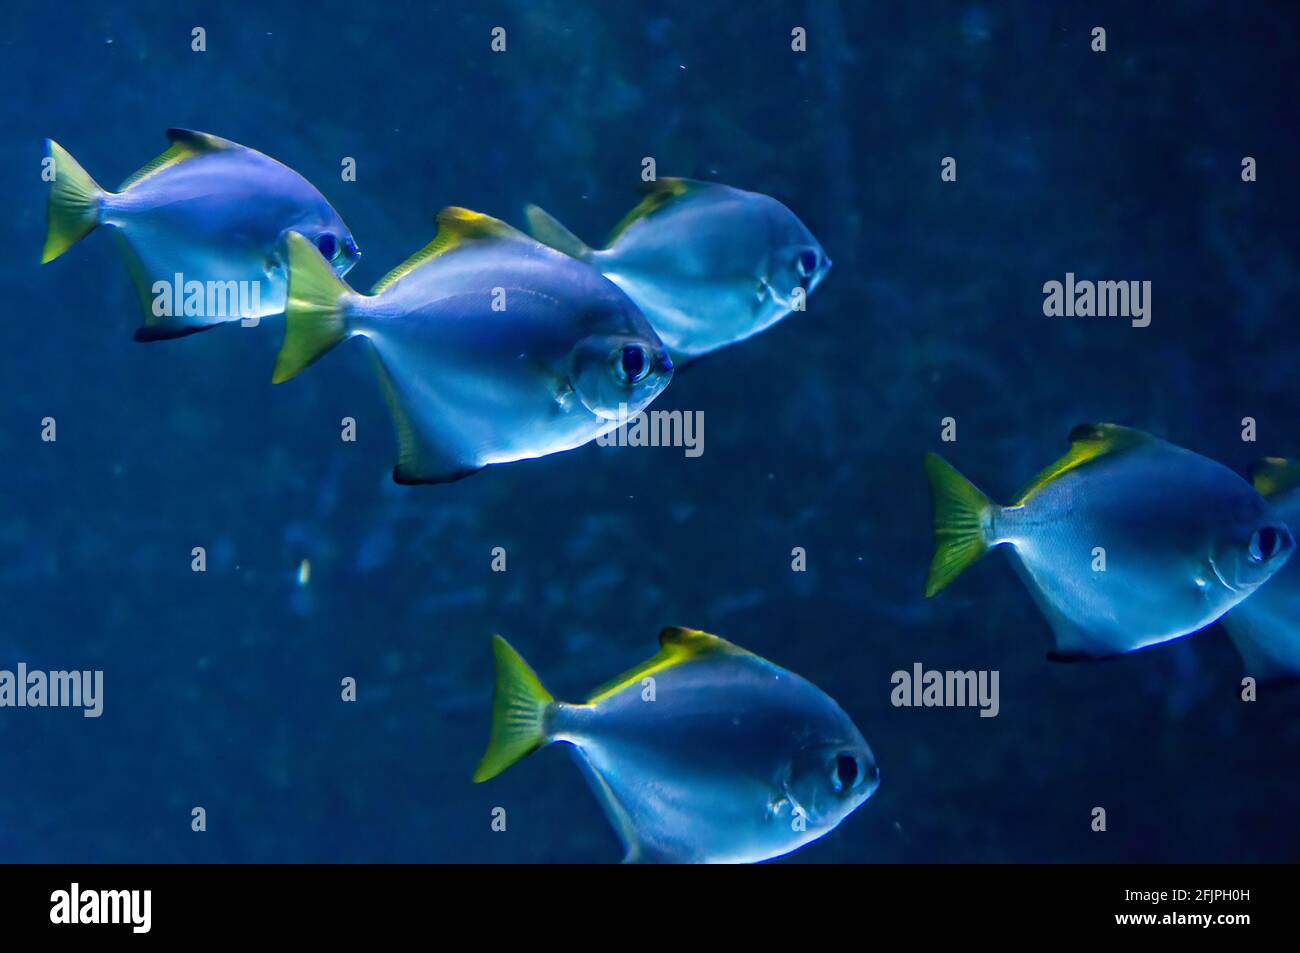 A shoal of Monodactylus argenteus (a genus of moonyfishes found in fresh, brackish and marine waters) swimming in a water tank in Sao Paulo aquarium. Stock Photo